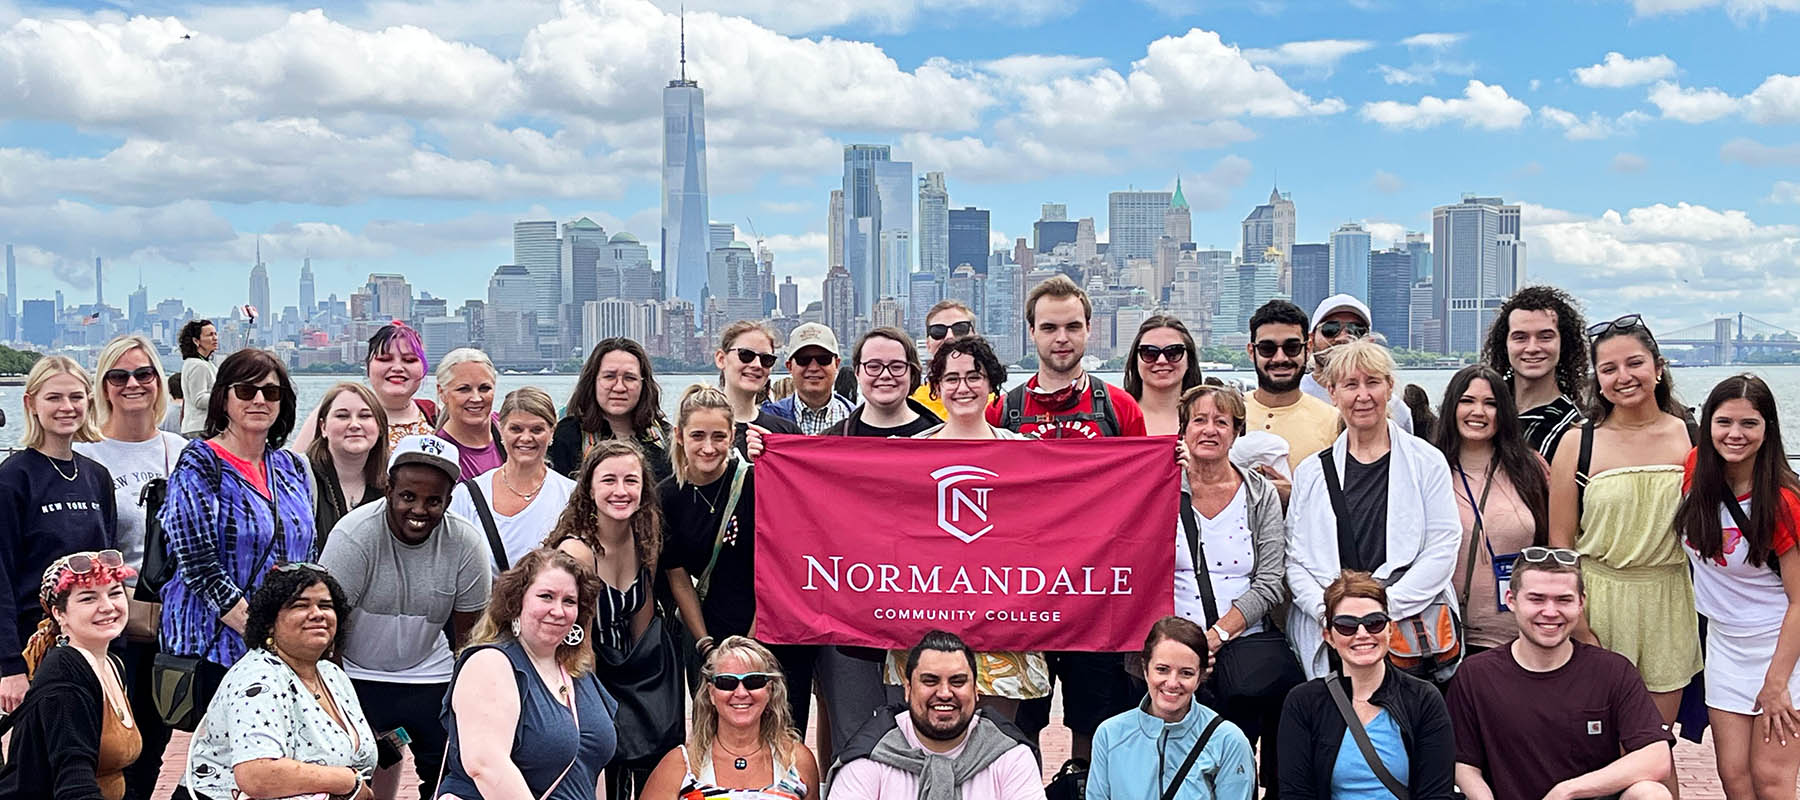 Students enjoying the opportunity to travel and learn through Normandale's academic travel abroad program.